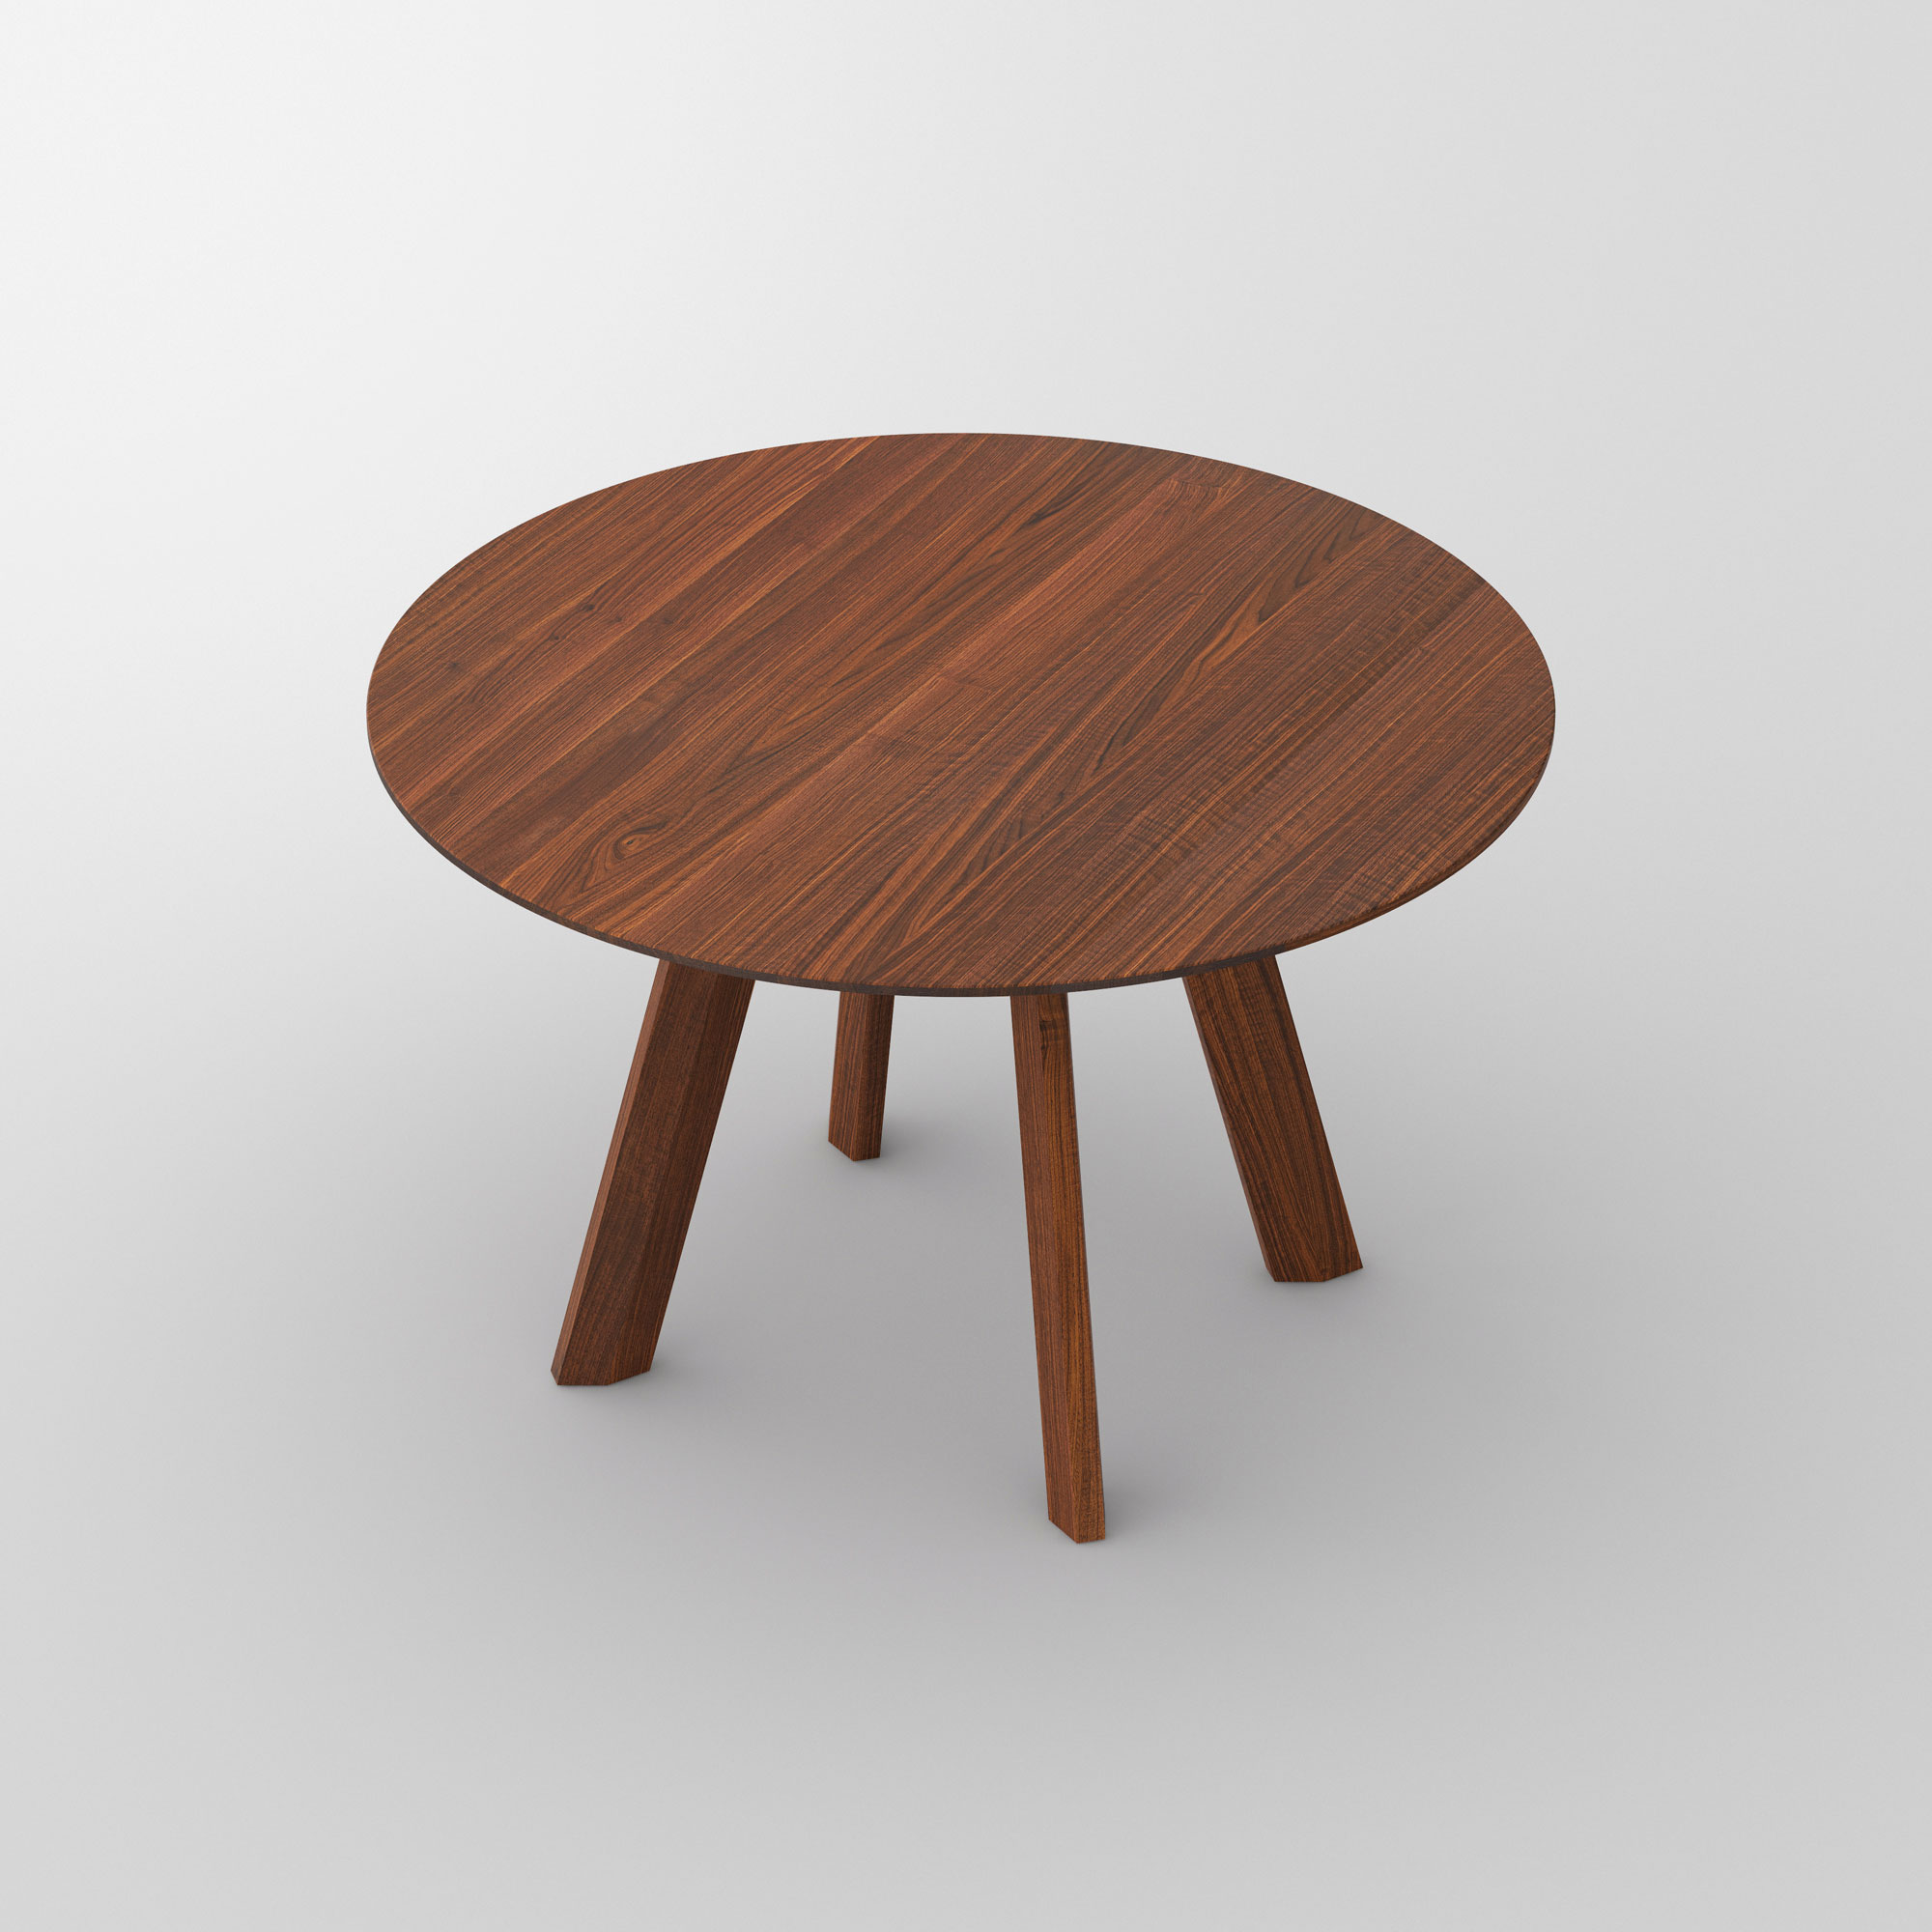 Designer Round Table RHOMBI ROUND cam3 custom made in solid wood by vitamin design